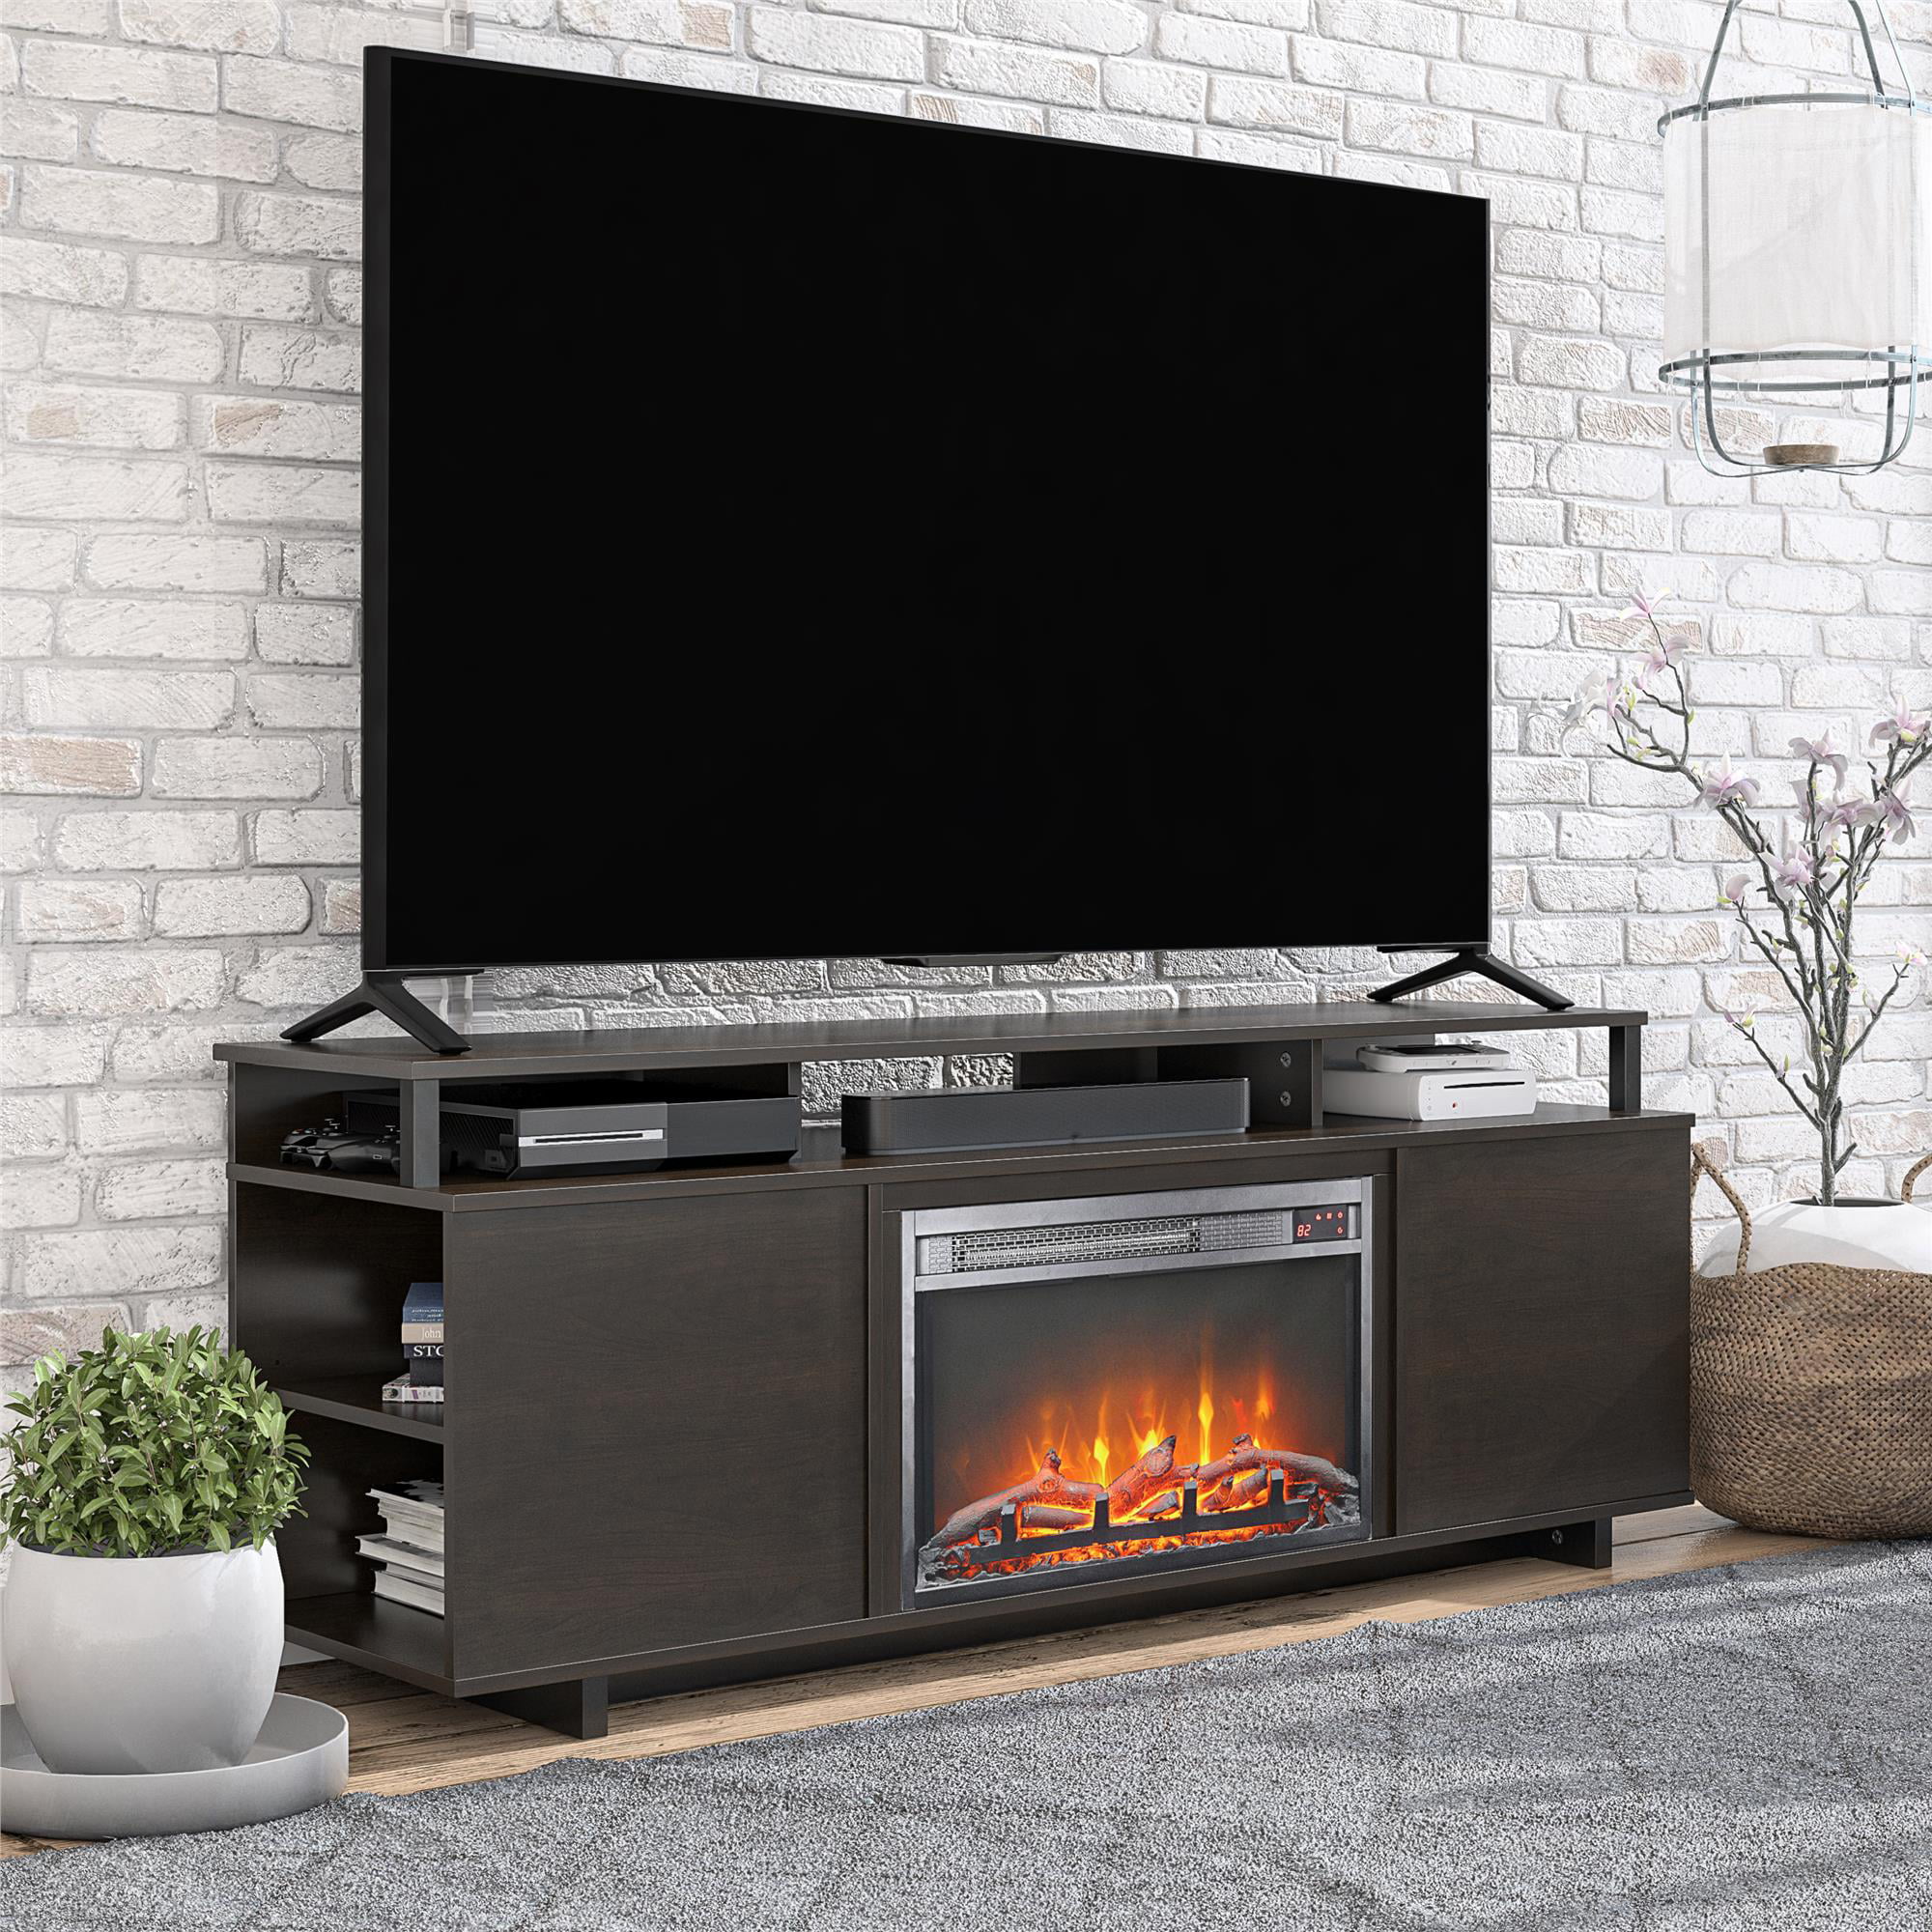 Black Oak Mainstays Fireplace TV Stand for TVs up to 65" 